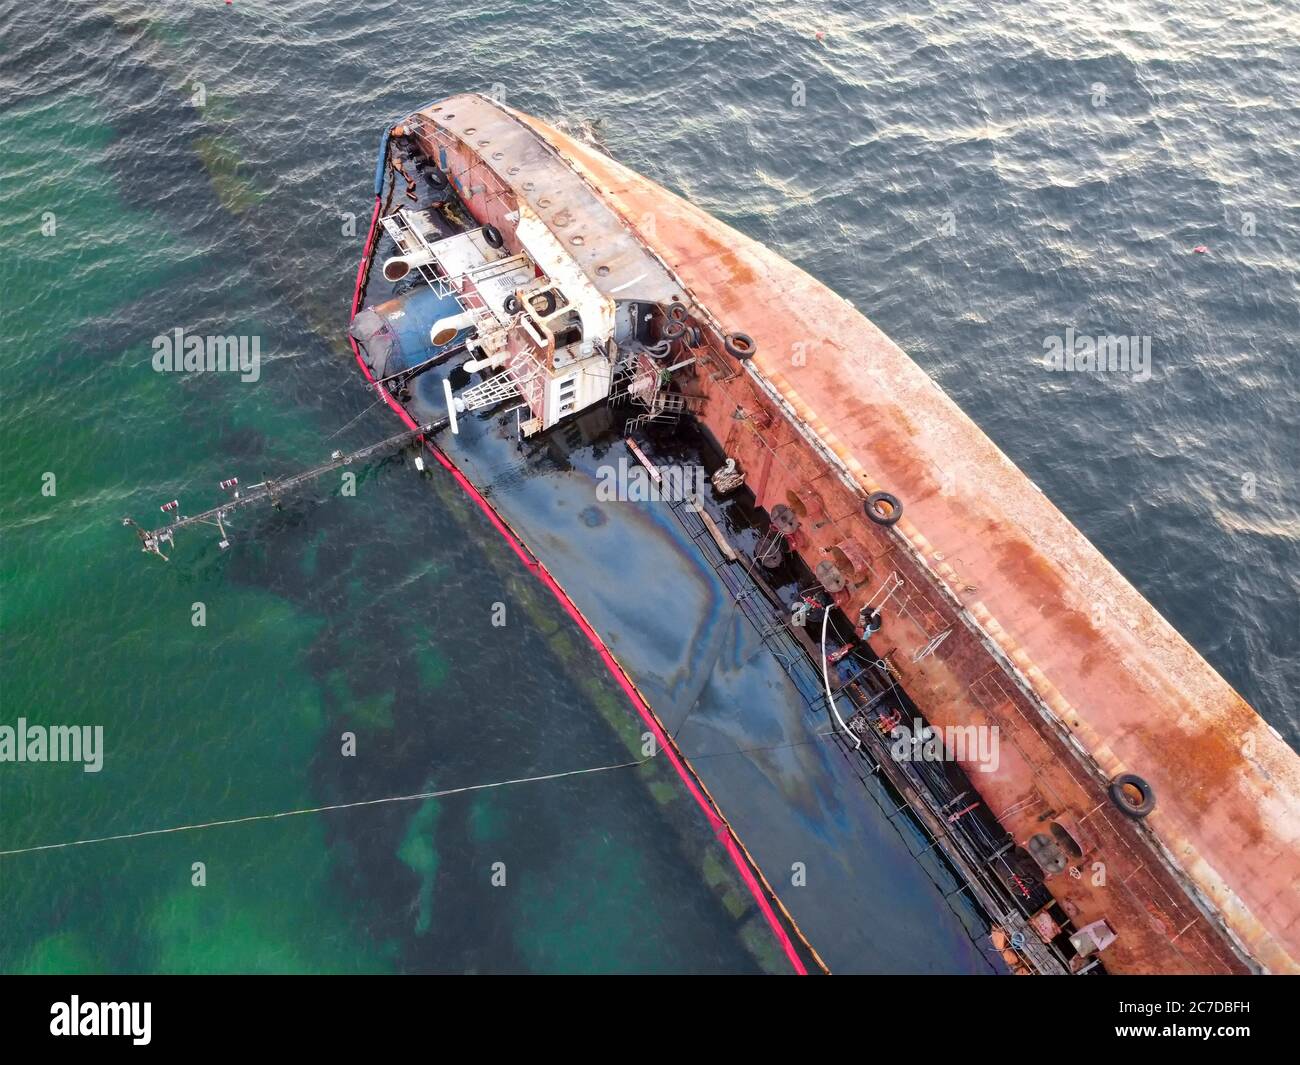 An overturned rusty tanker ran aground. Environmental disaster and oil spill into the sea by the sea. Old ship on the background of the emerald sea. Stock Photo